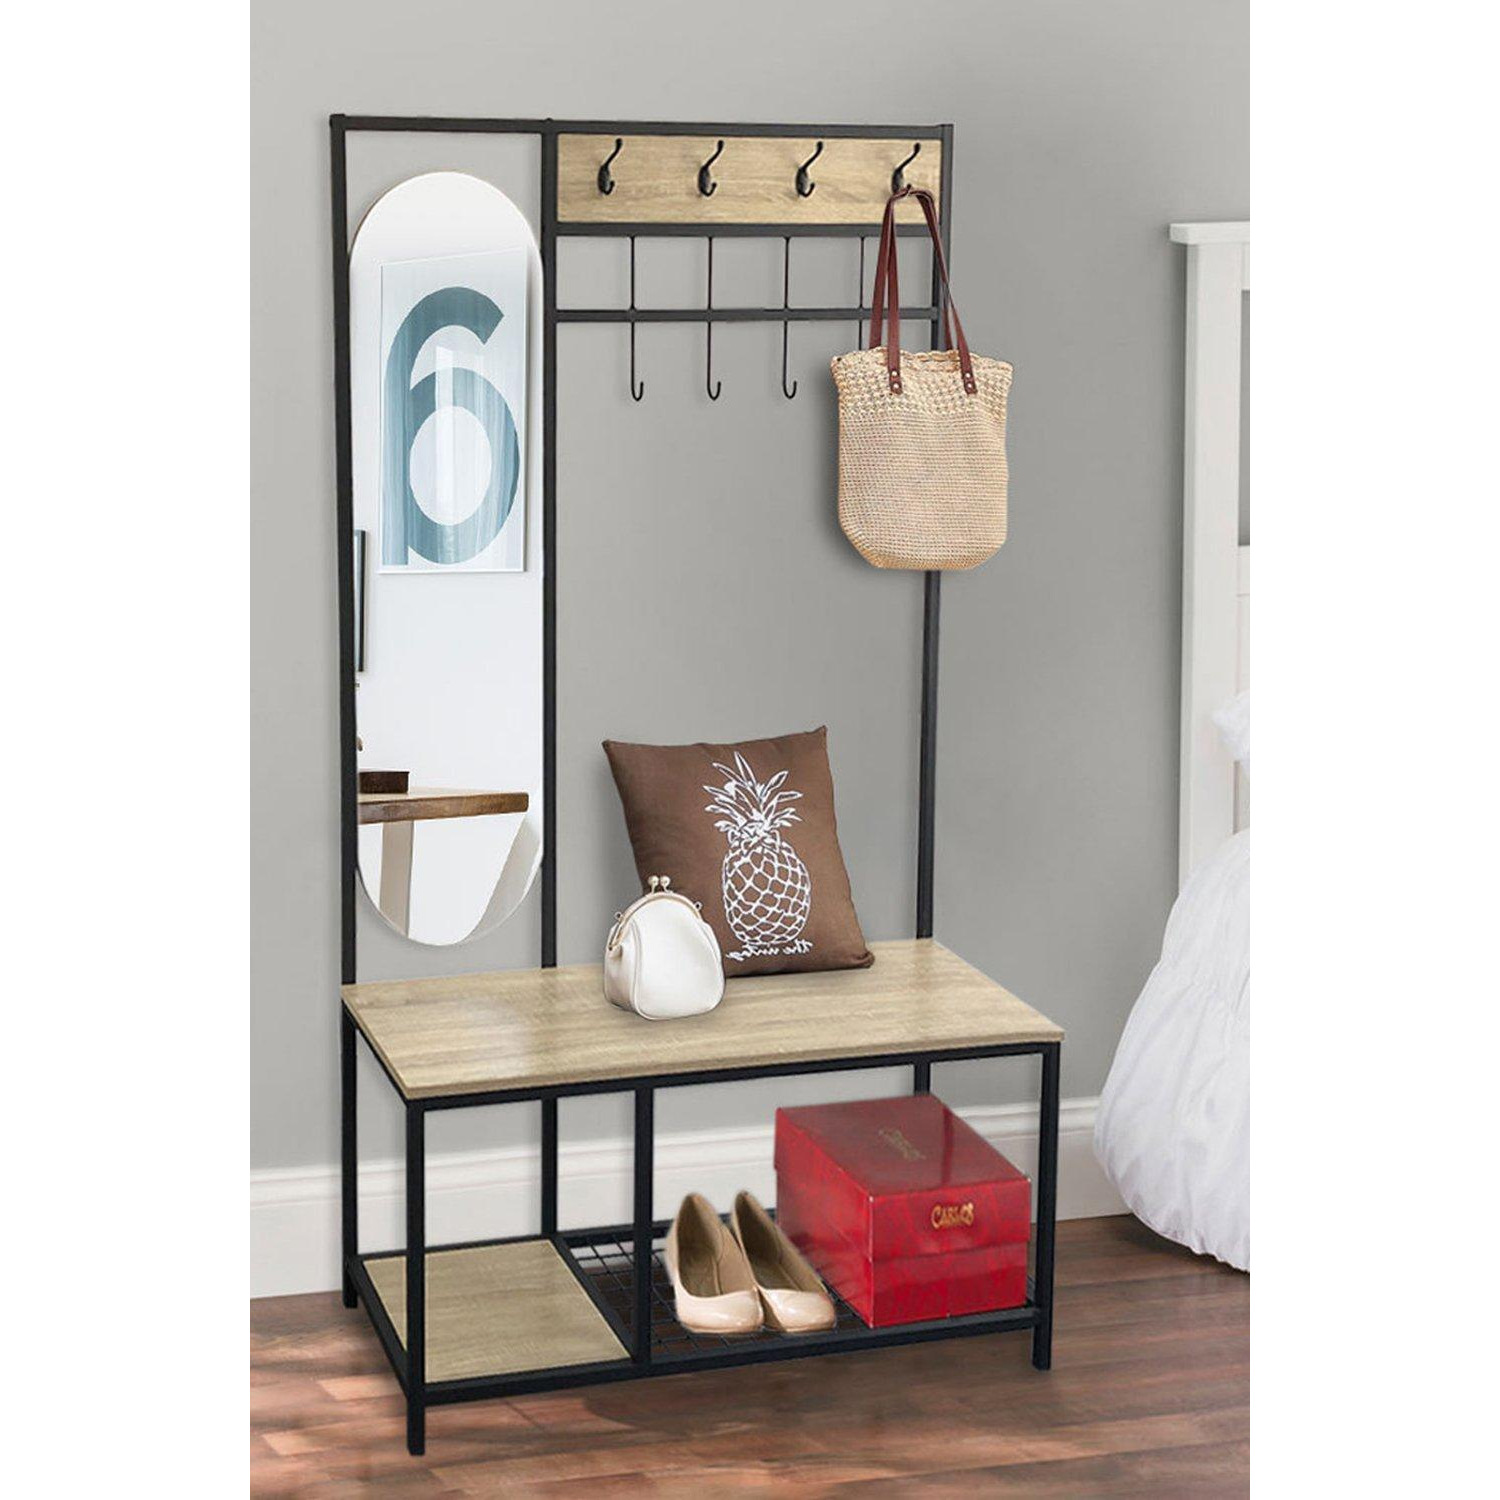 Coat Rack with Shoe Bench and Mirror - image 1